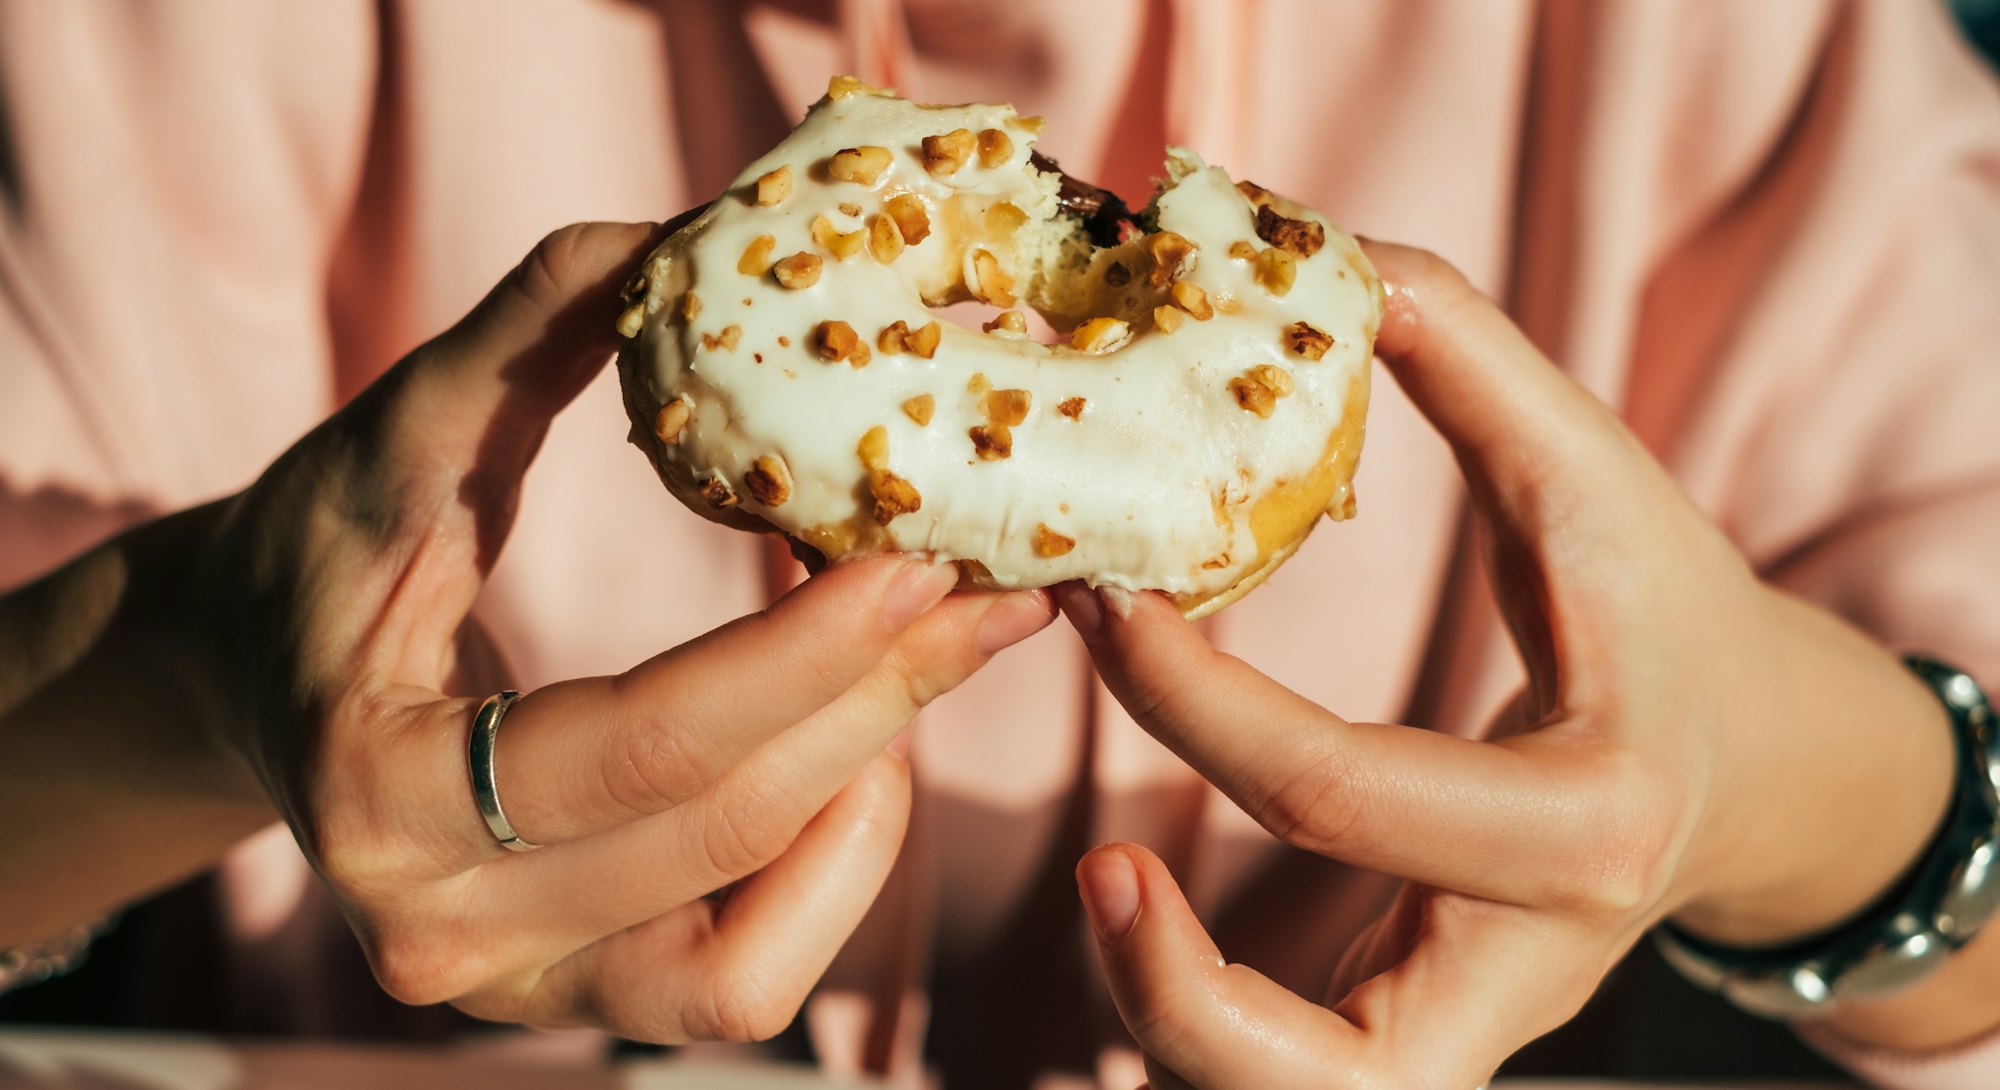 A mouthwatering fall donut with a white glaze and nuts